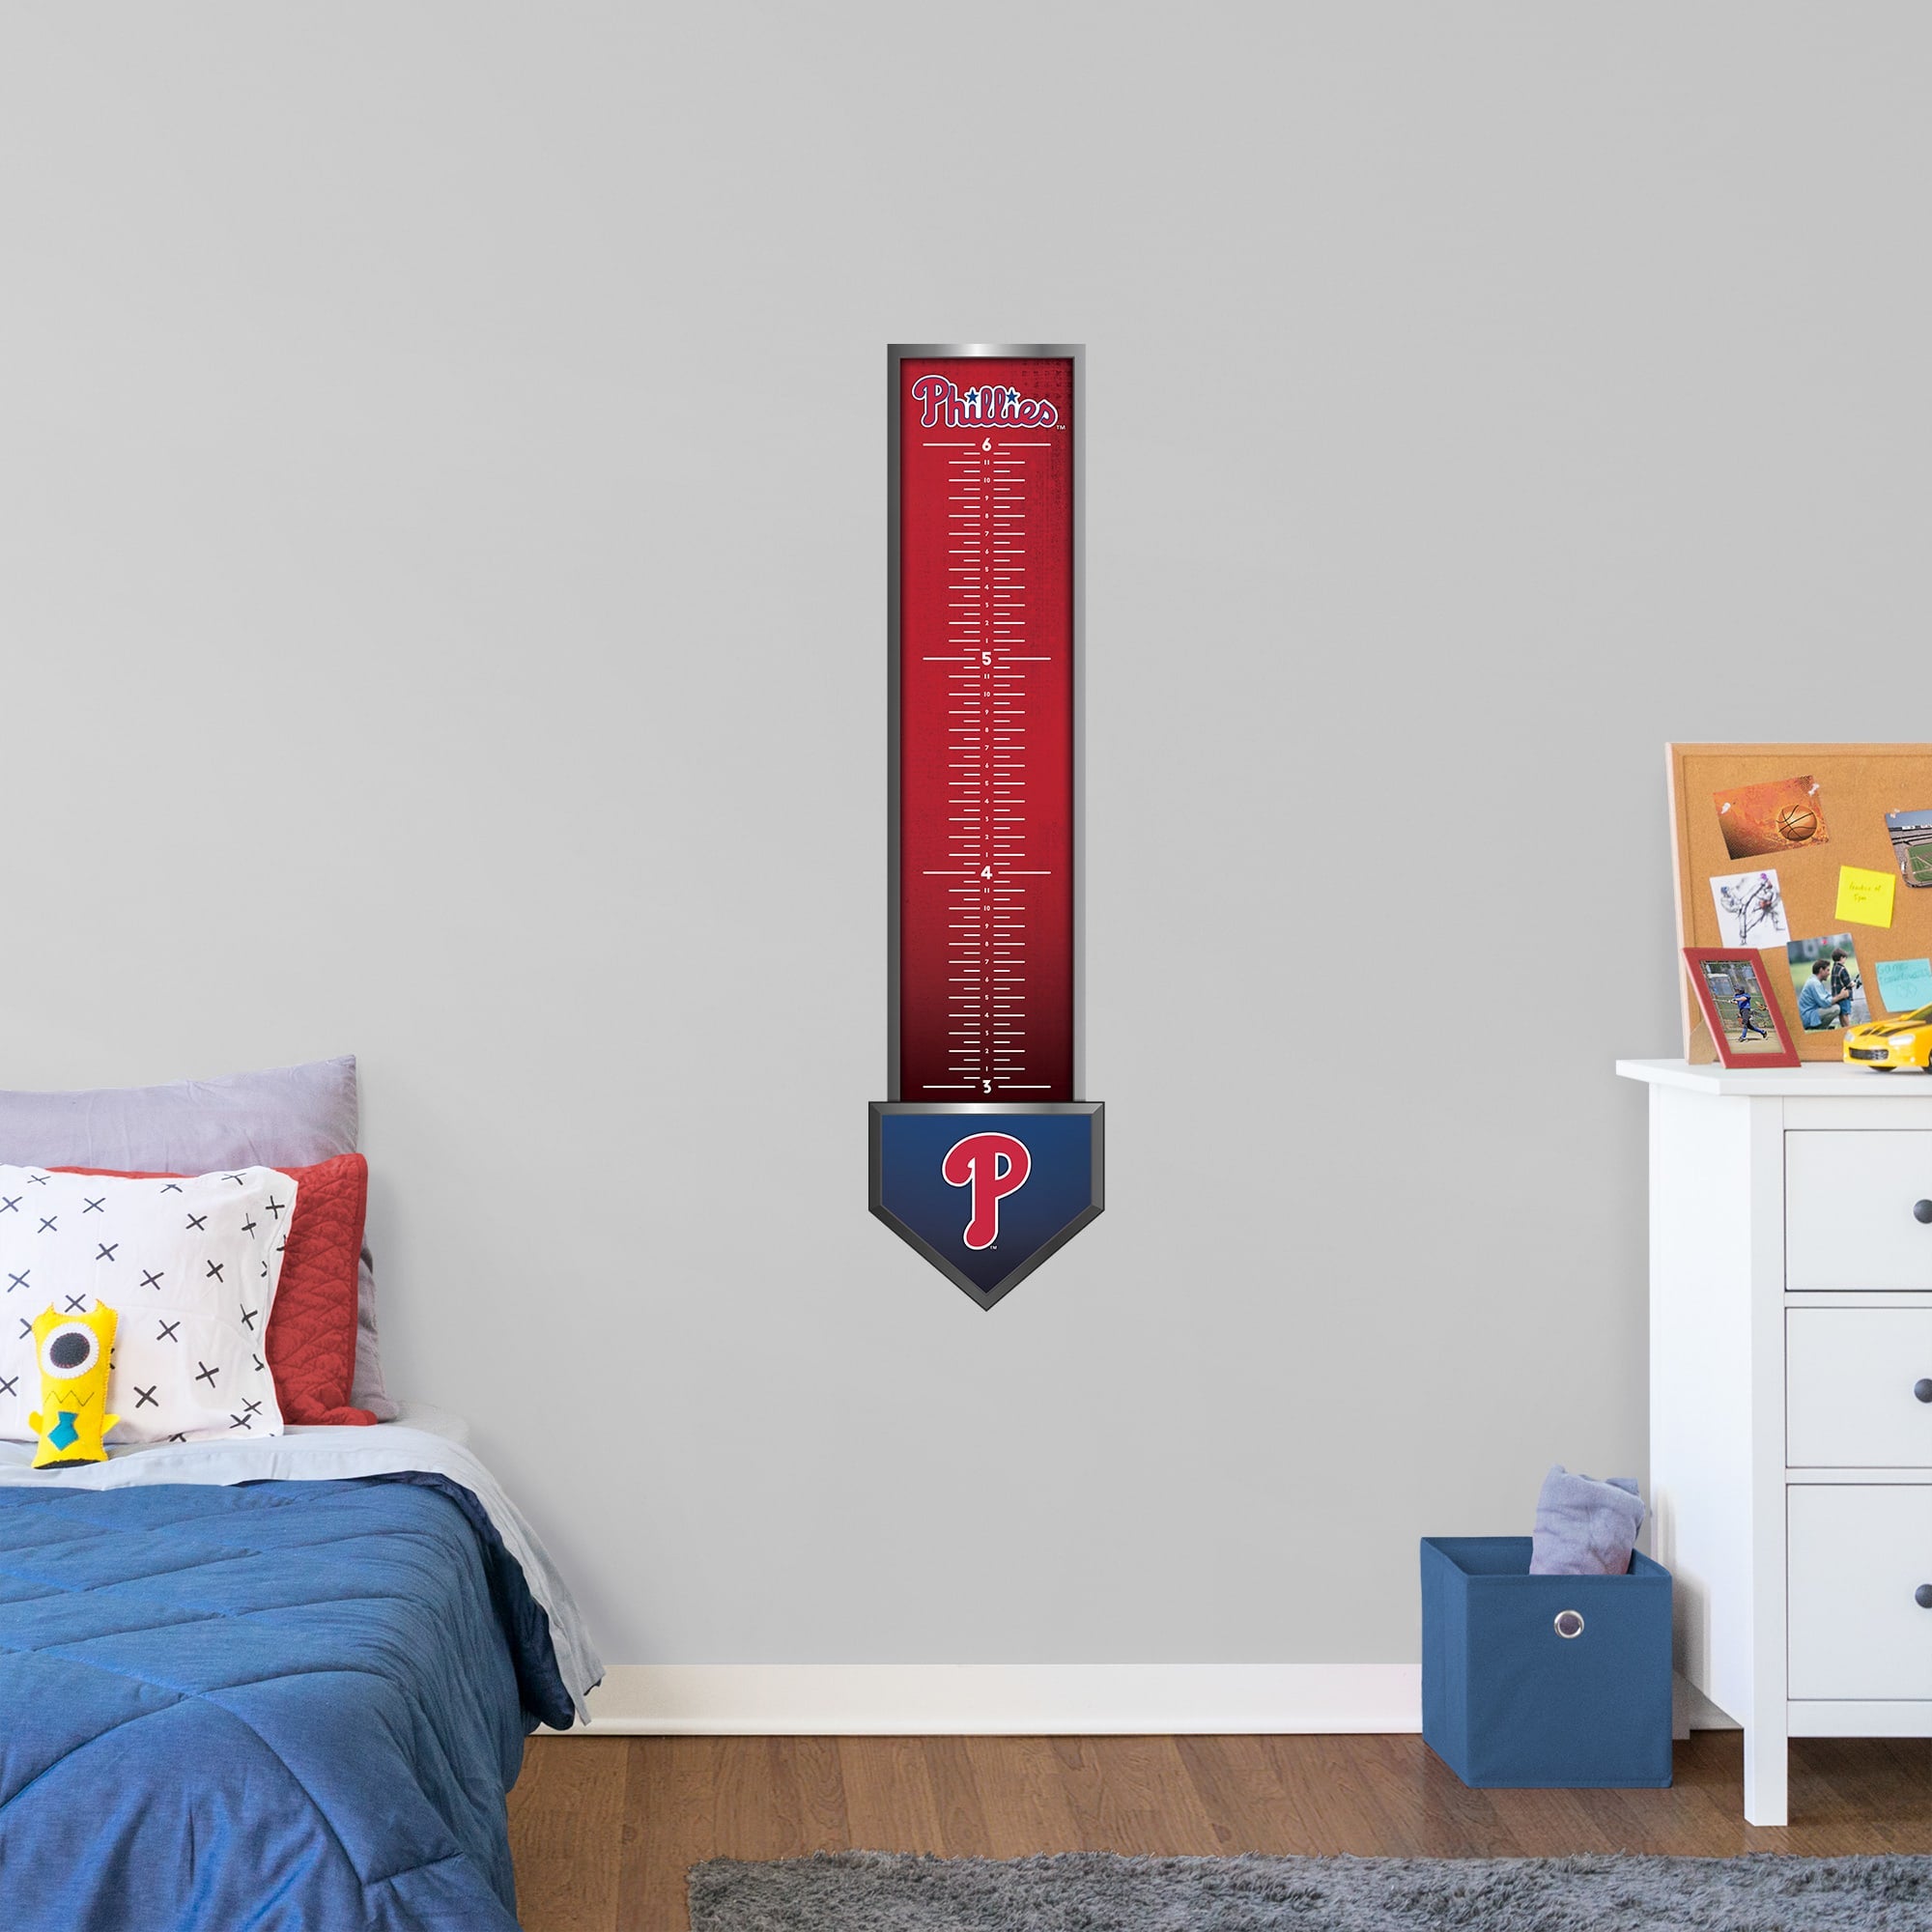 Philadelphia Phillies: Growth Chart - Officially Licensed MLB Removable Wall Graphic 13.0"W x 54.0"H by Fathead | Vinyl